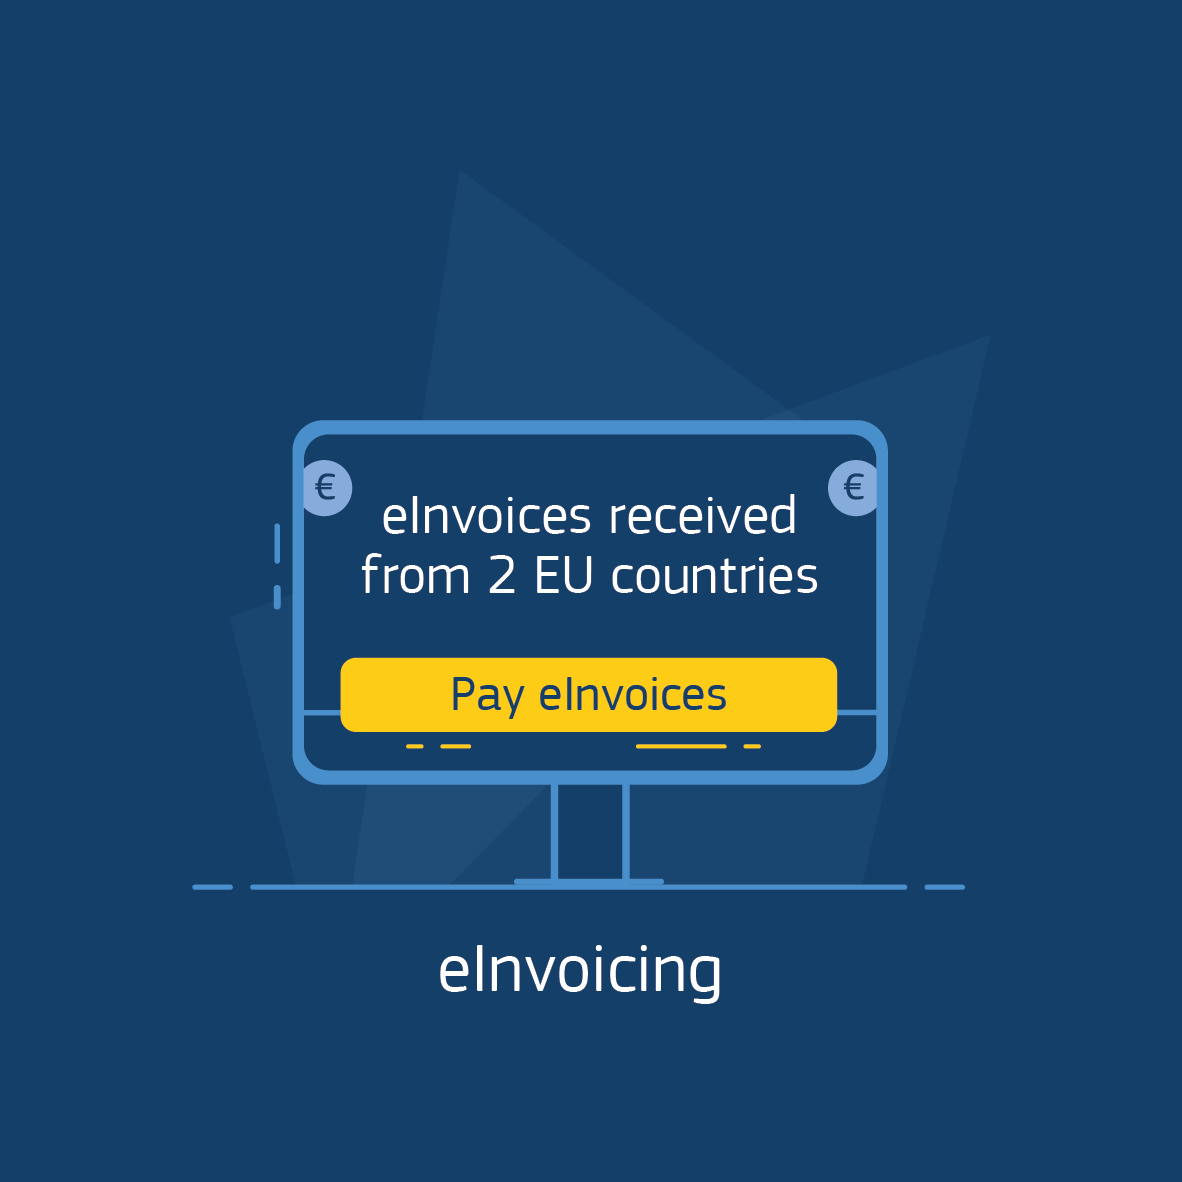 eInvoices received from 2 EU countries